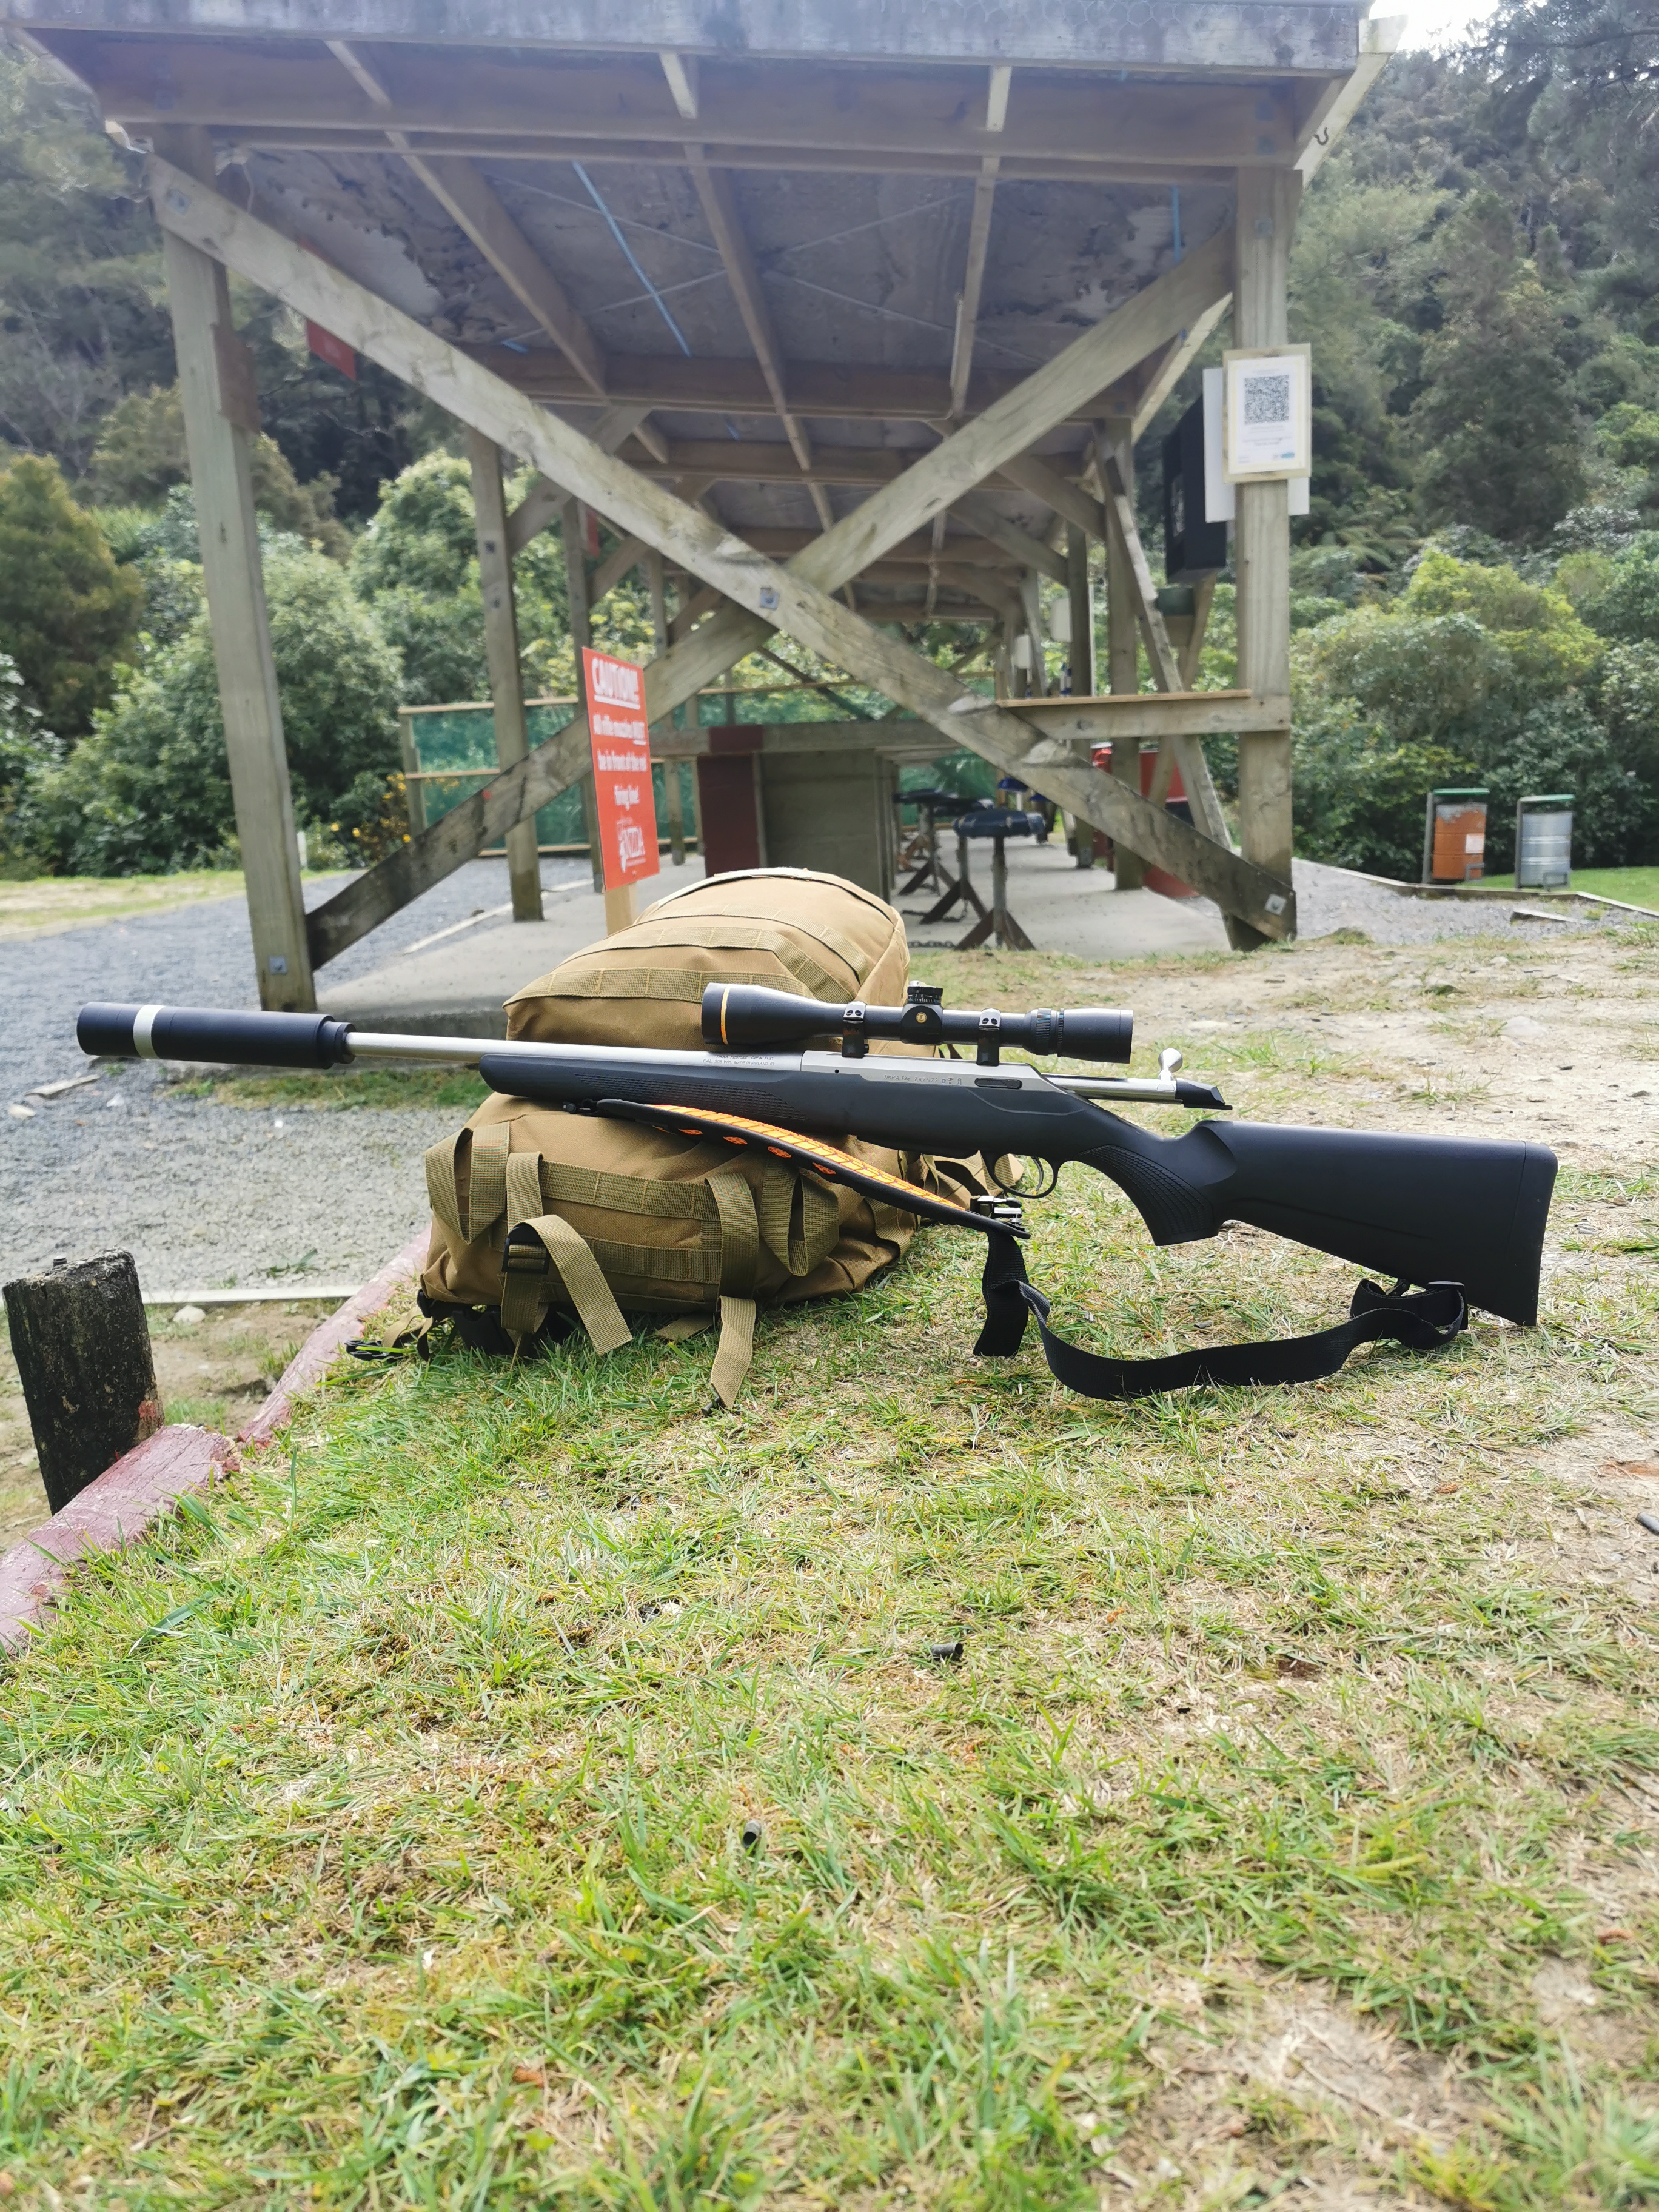 https://www.nzhuntingandshooting.co.nz/attachments/f32/206982d1664430661-sighted-my-first-rifle-rifle.jpg